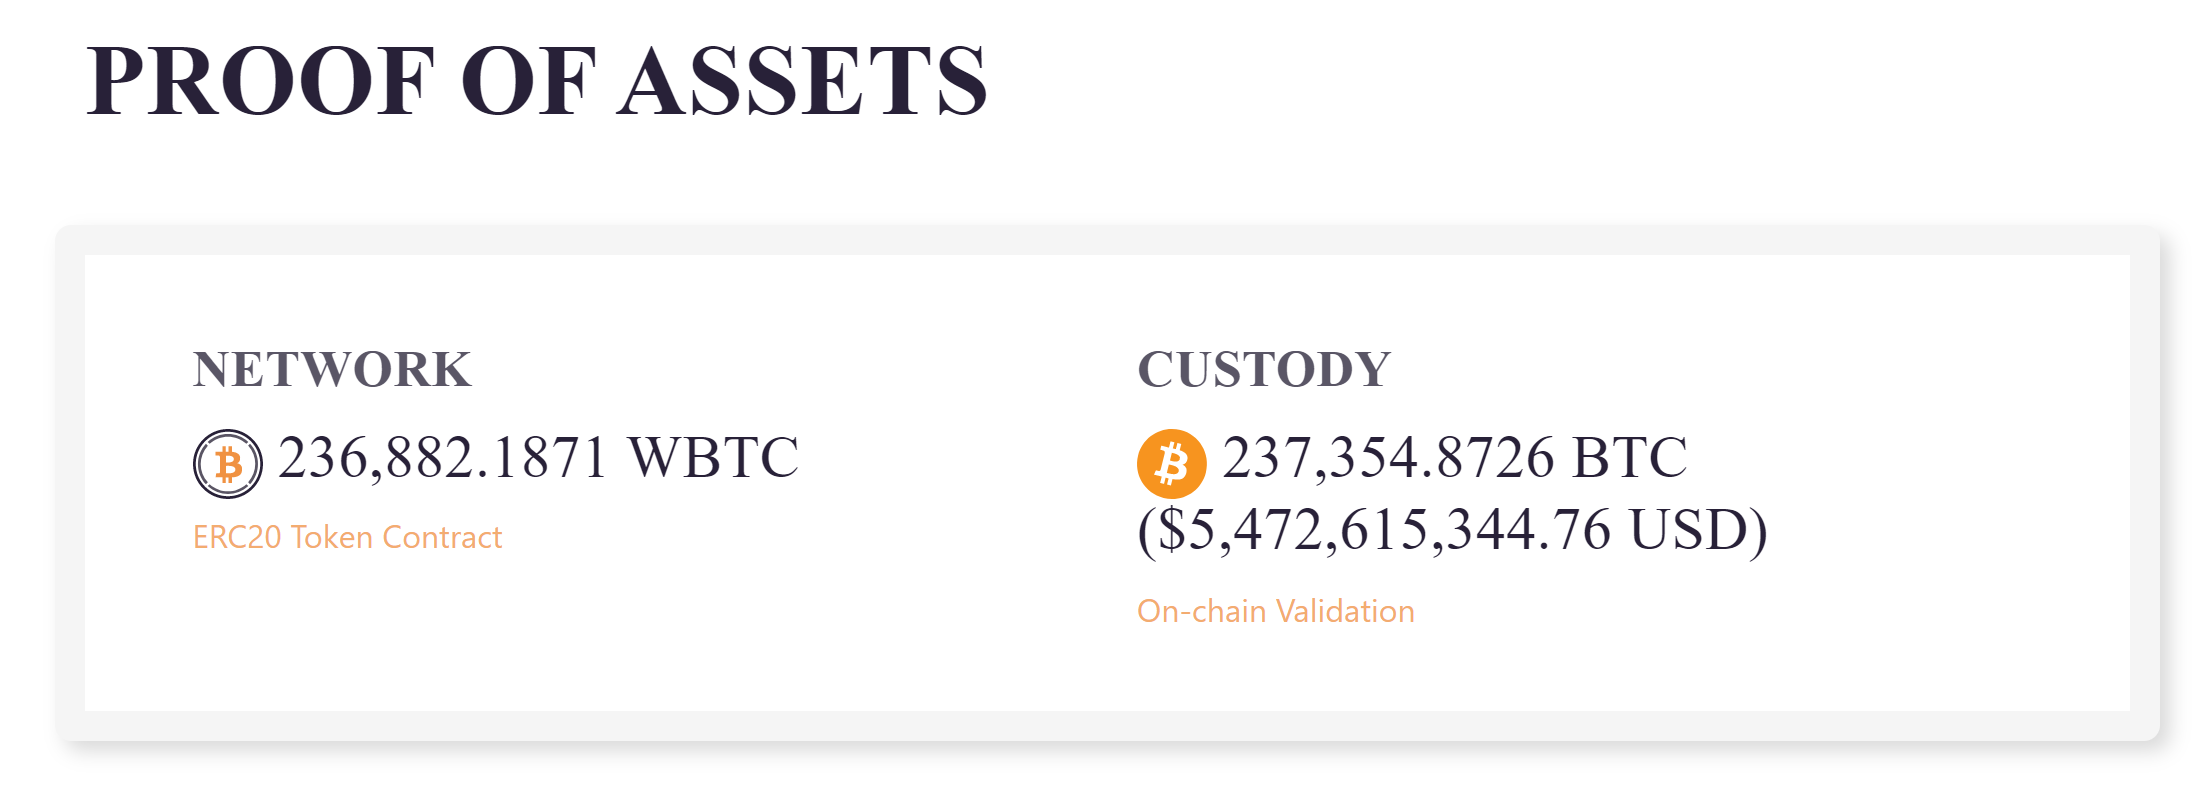 Wrapped Bitcoin Proof of Assets